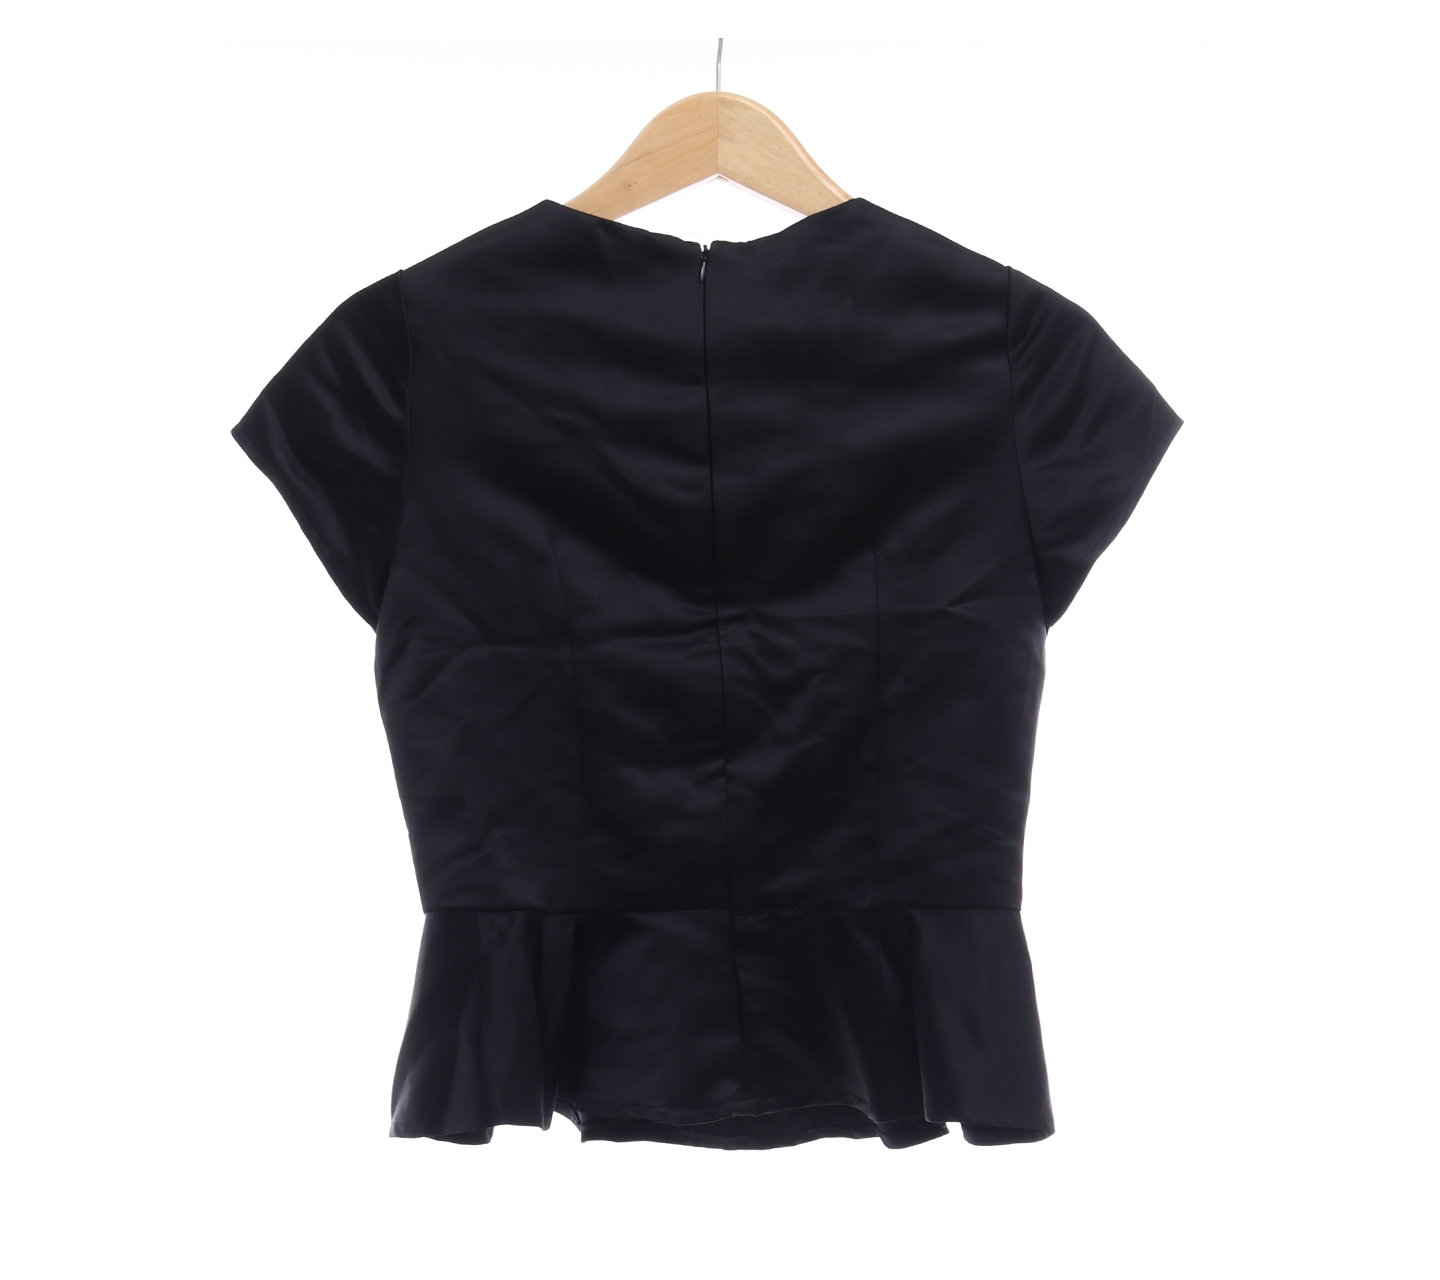 Arboury House Of Clothing Black Blouse